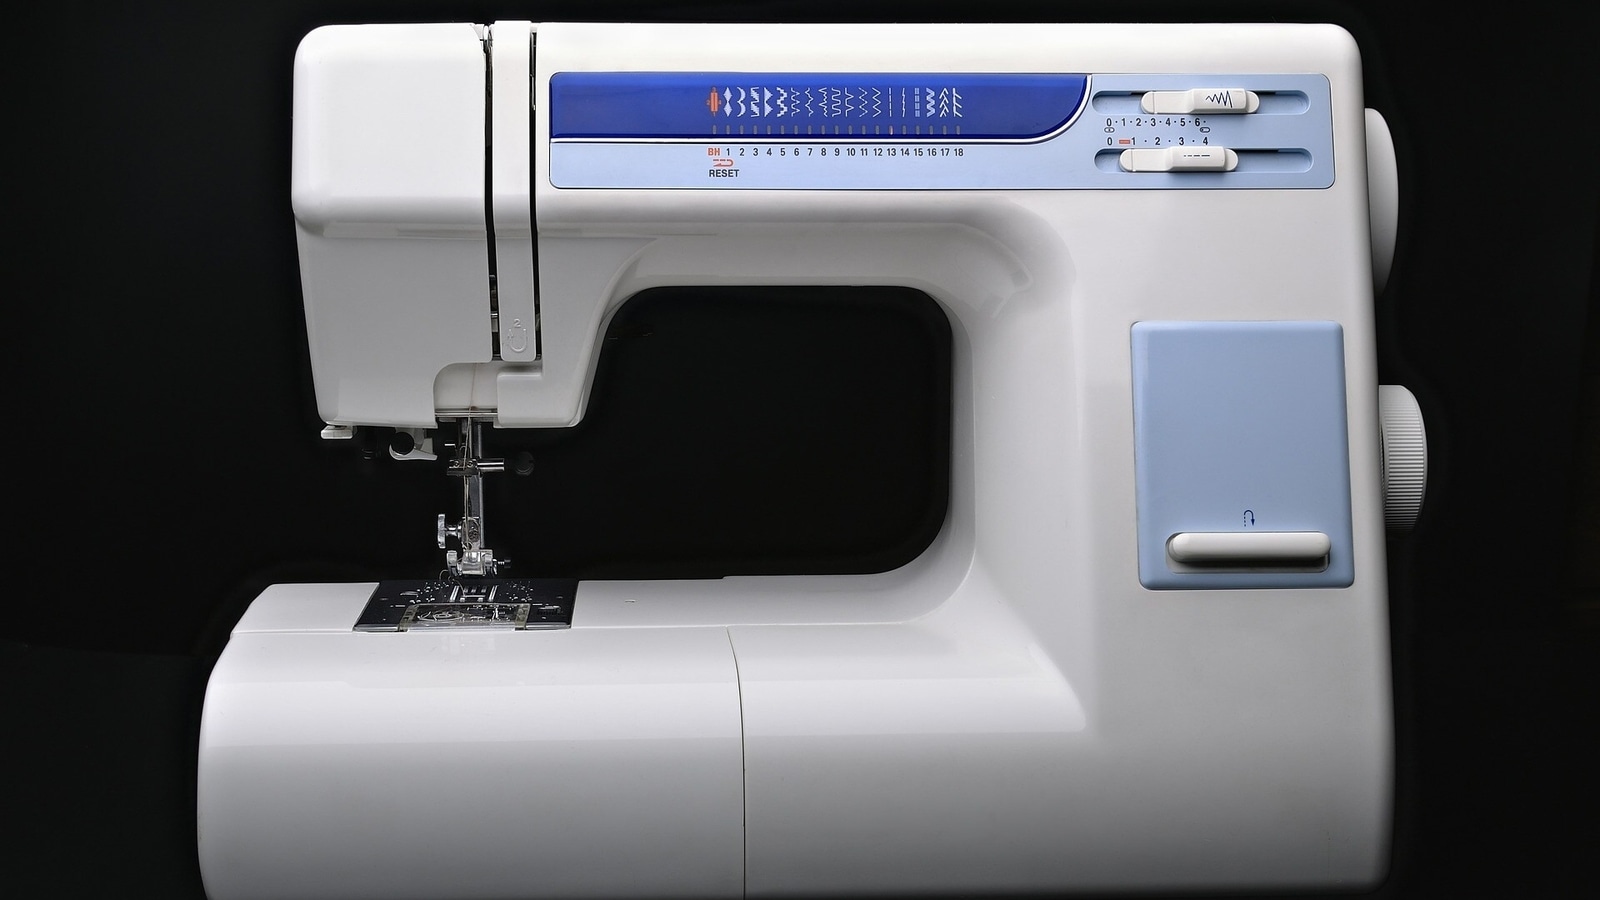 Sewing Machine Recommendations For Easy Stitching - Times of India  (February, 2024)